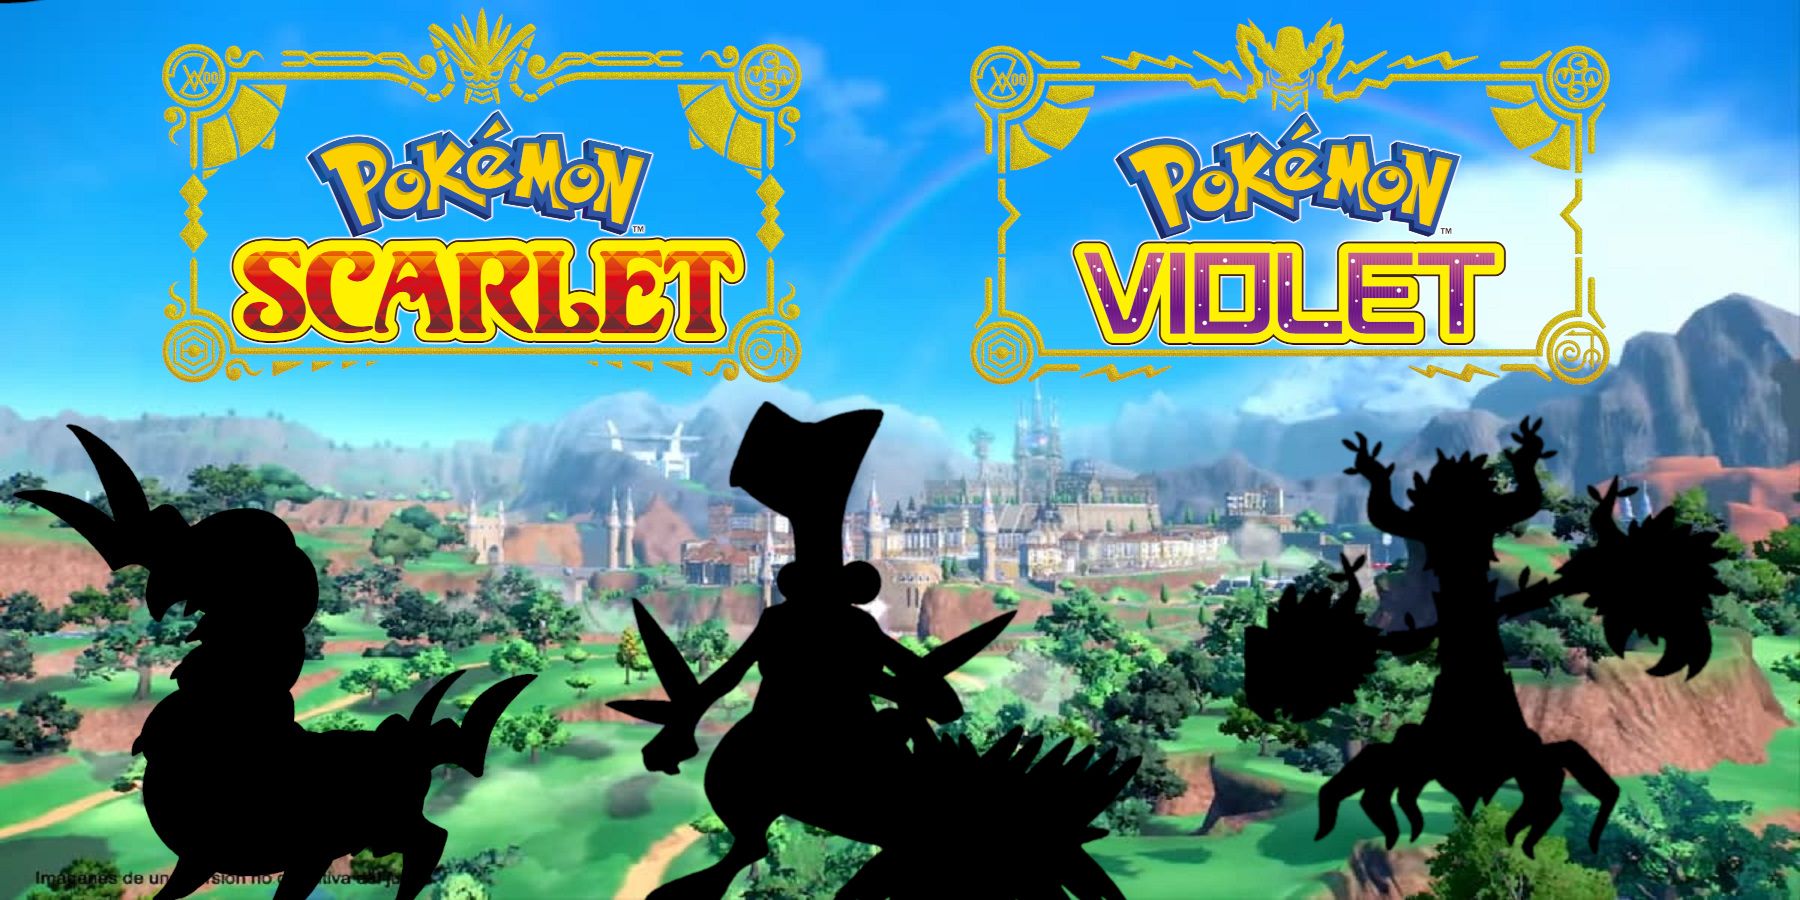 You Likely Won't Be Able To Catch 'Em All In Pokémon Scarlet And Violet